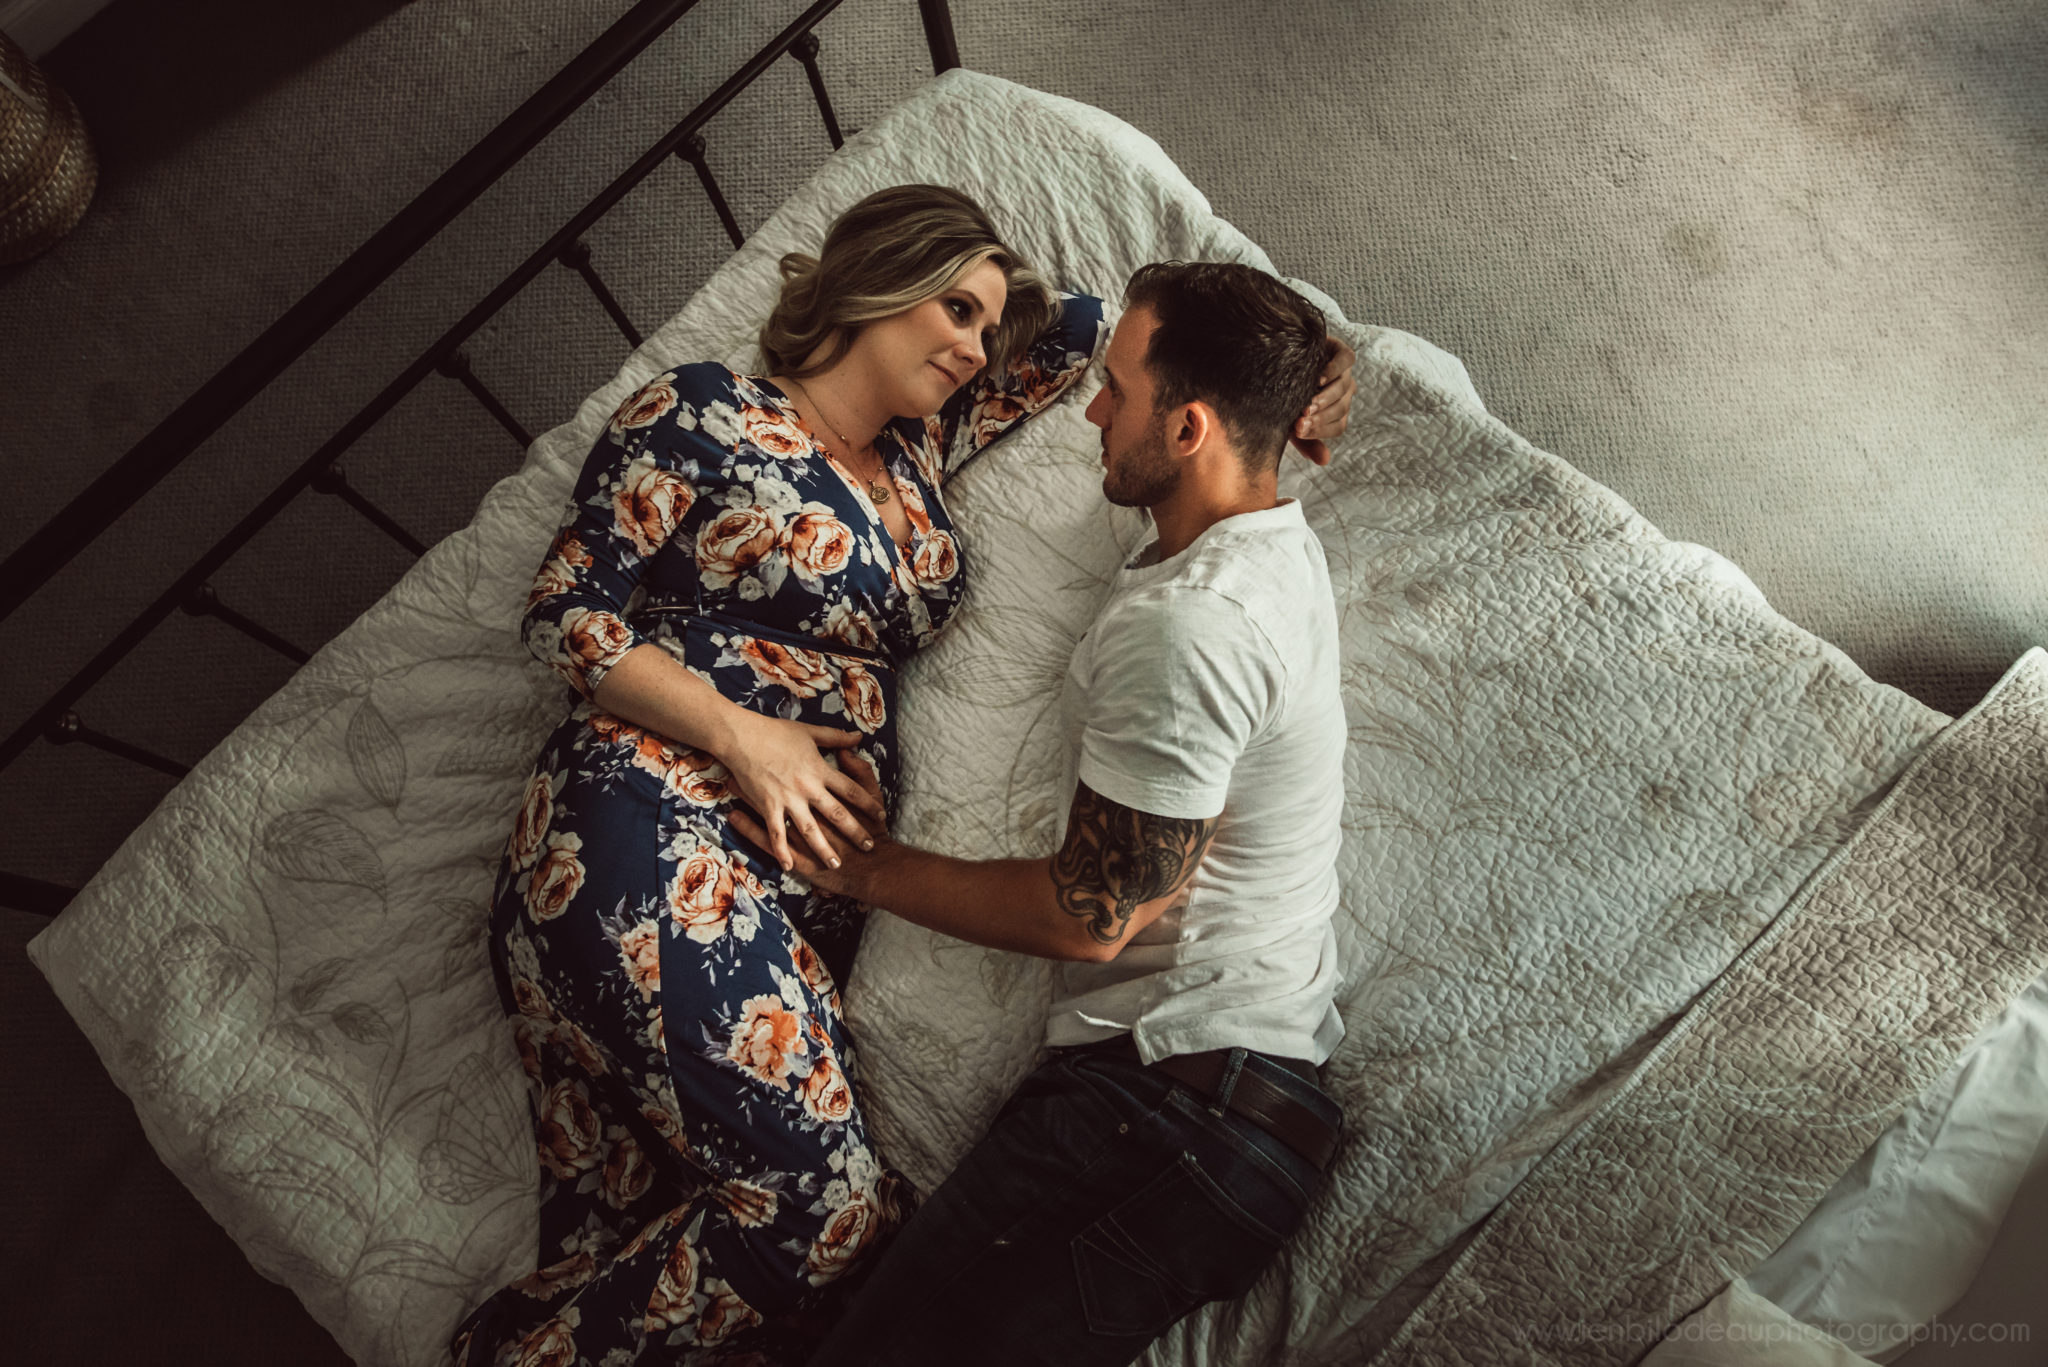 The Full Circle:  An In-Home Maternity Session | Massachusetts Lifestyle Maternity Photographer